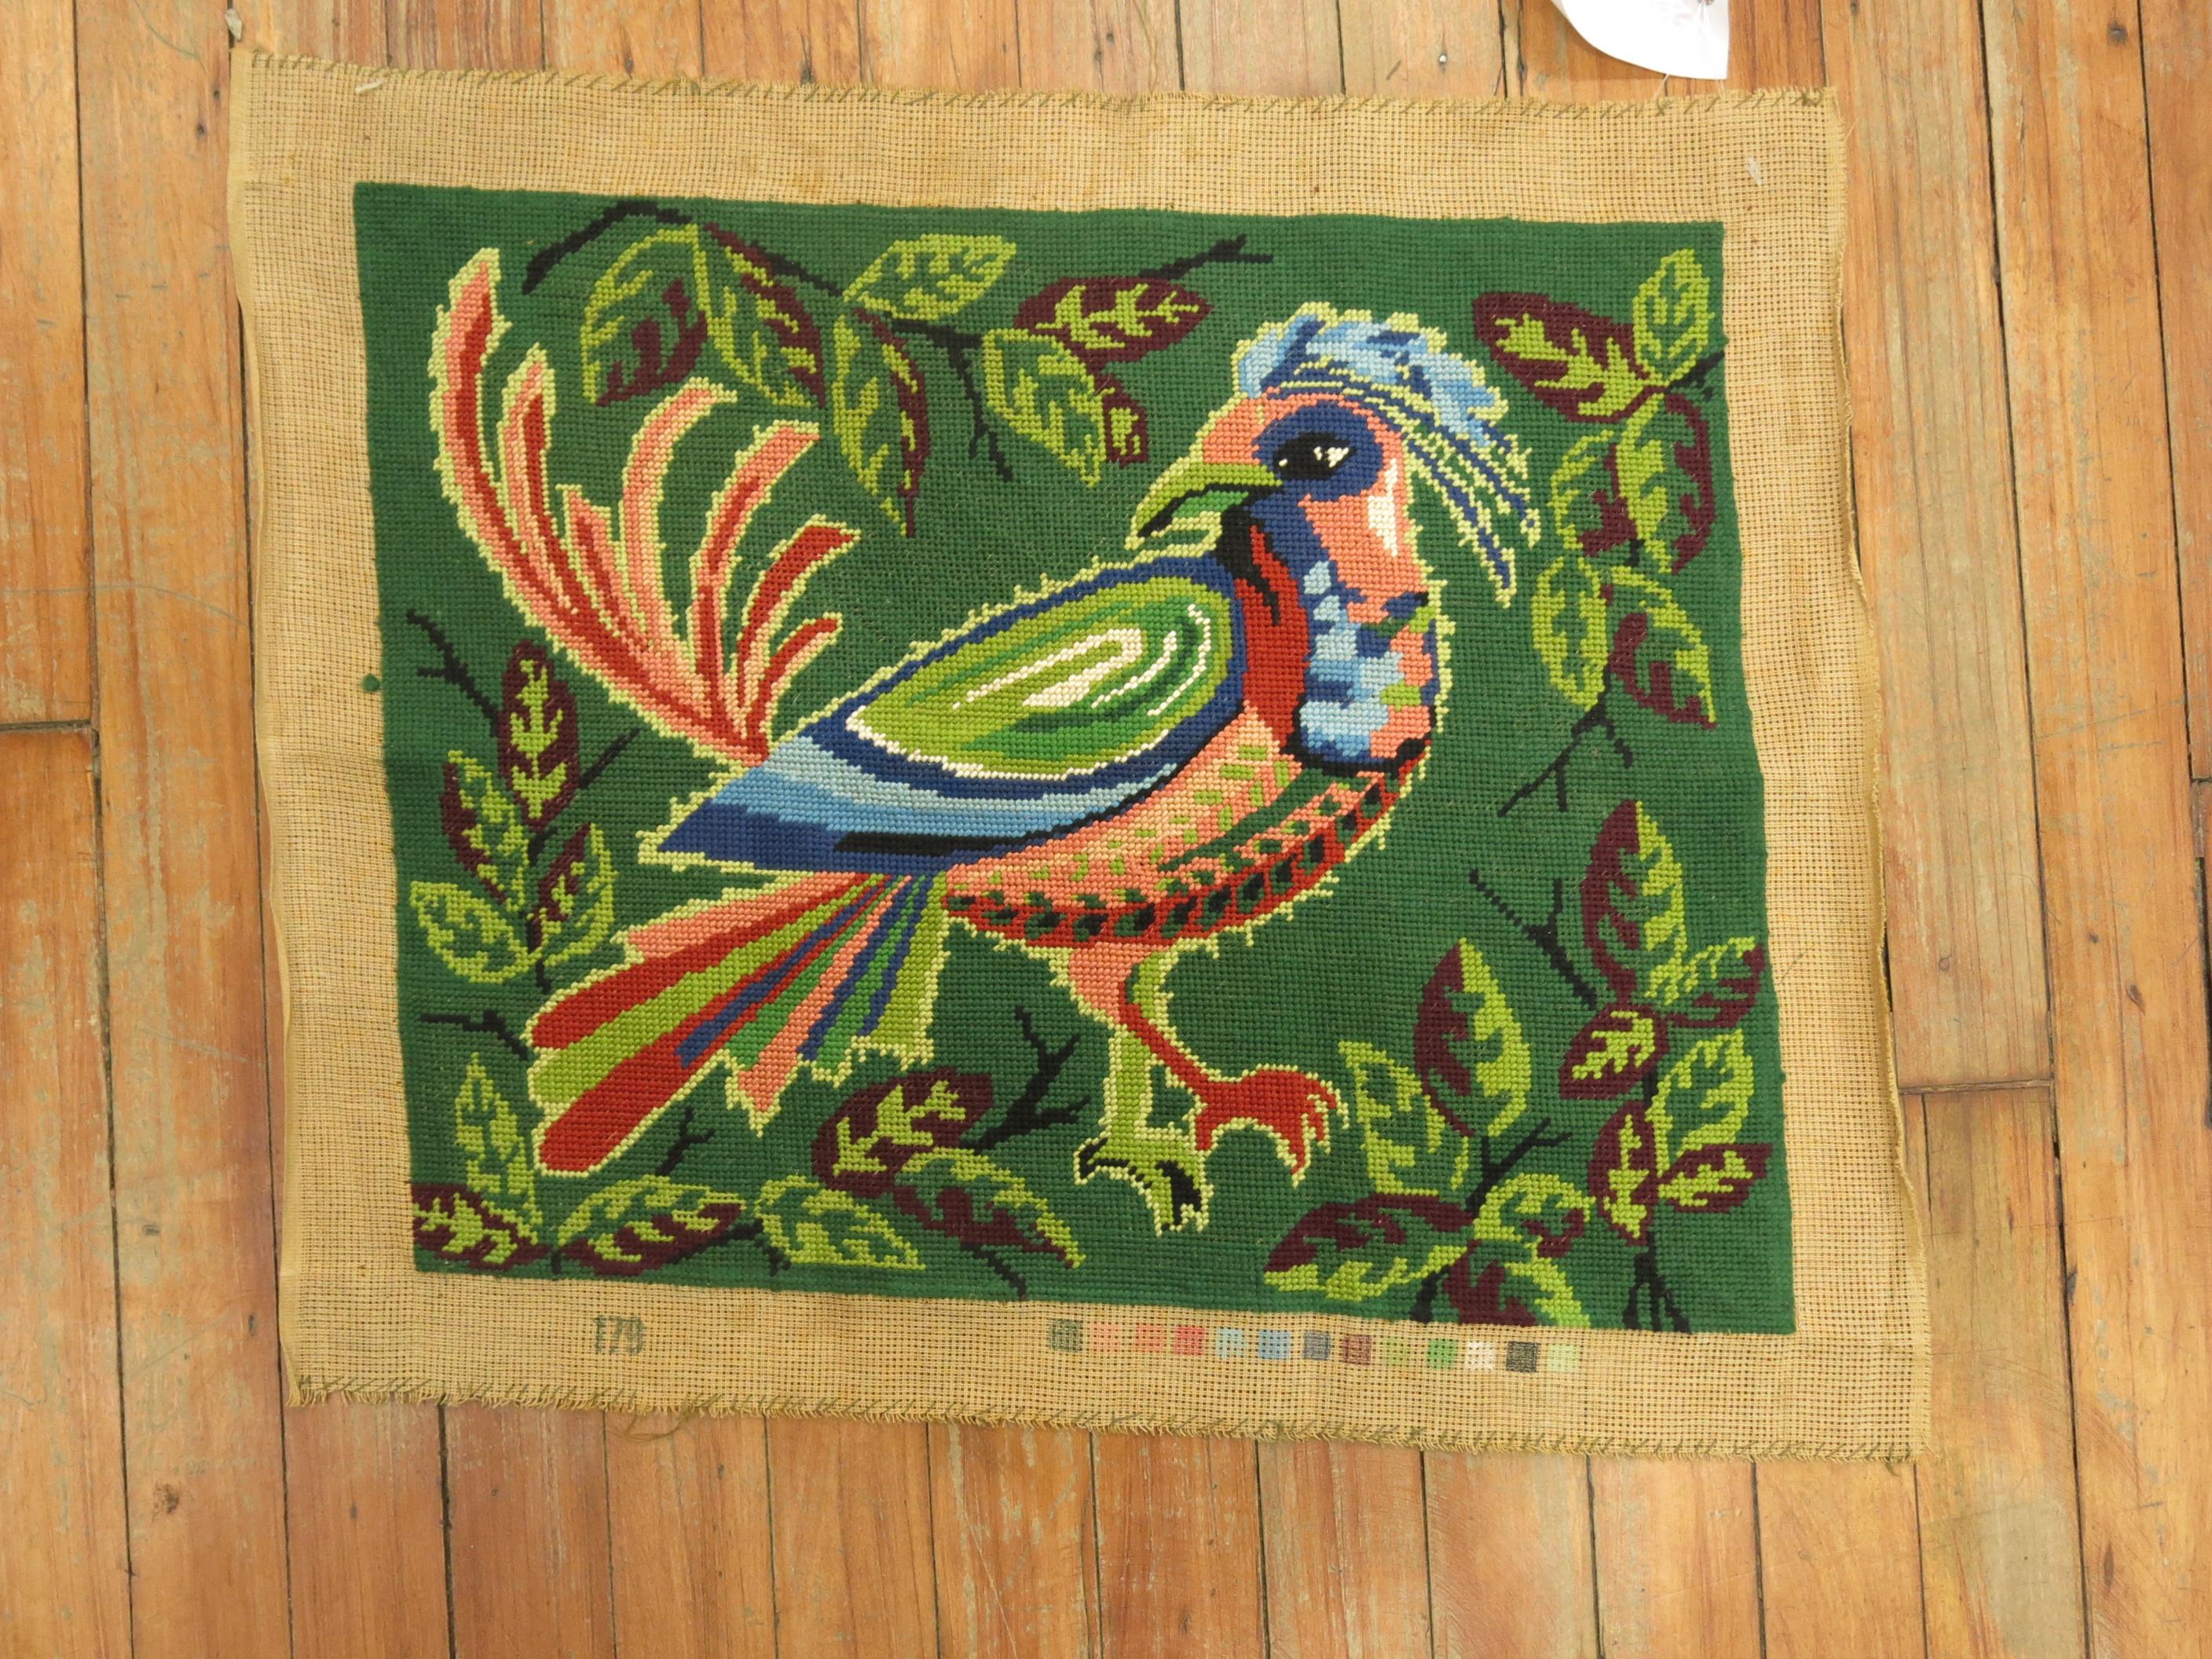 An interesting French needlepoint with a colorful pigeon from the middle of the 20th century. The bottom has an interesting set of color samples too.